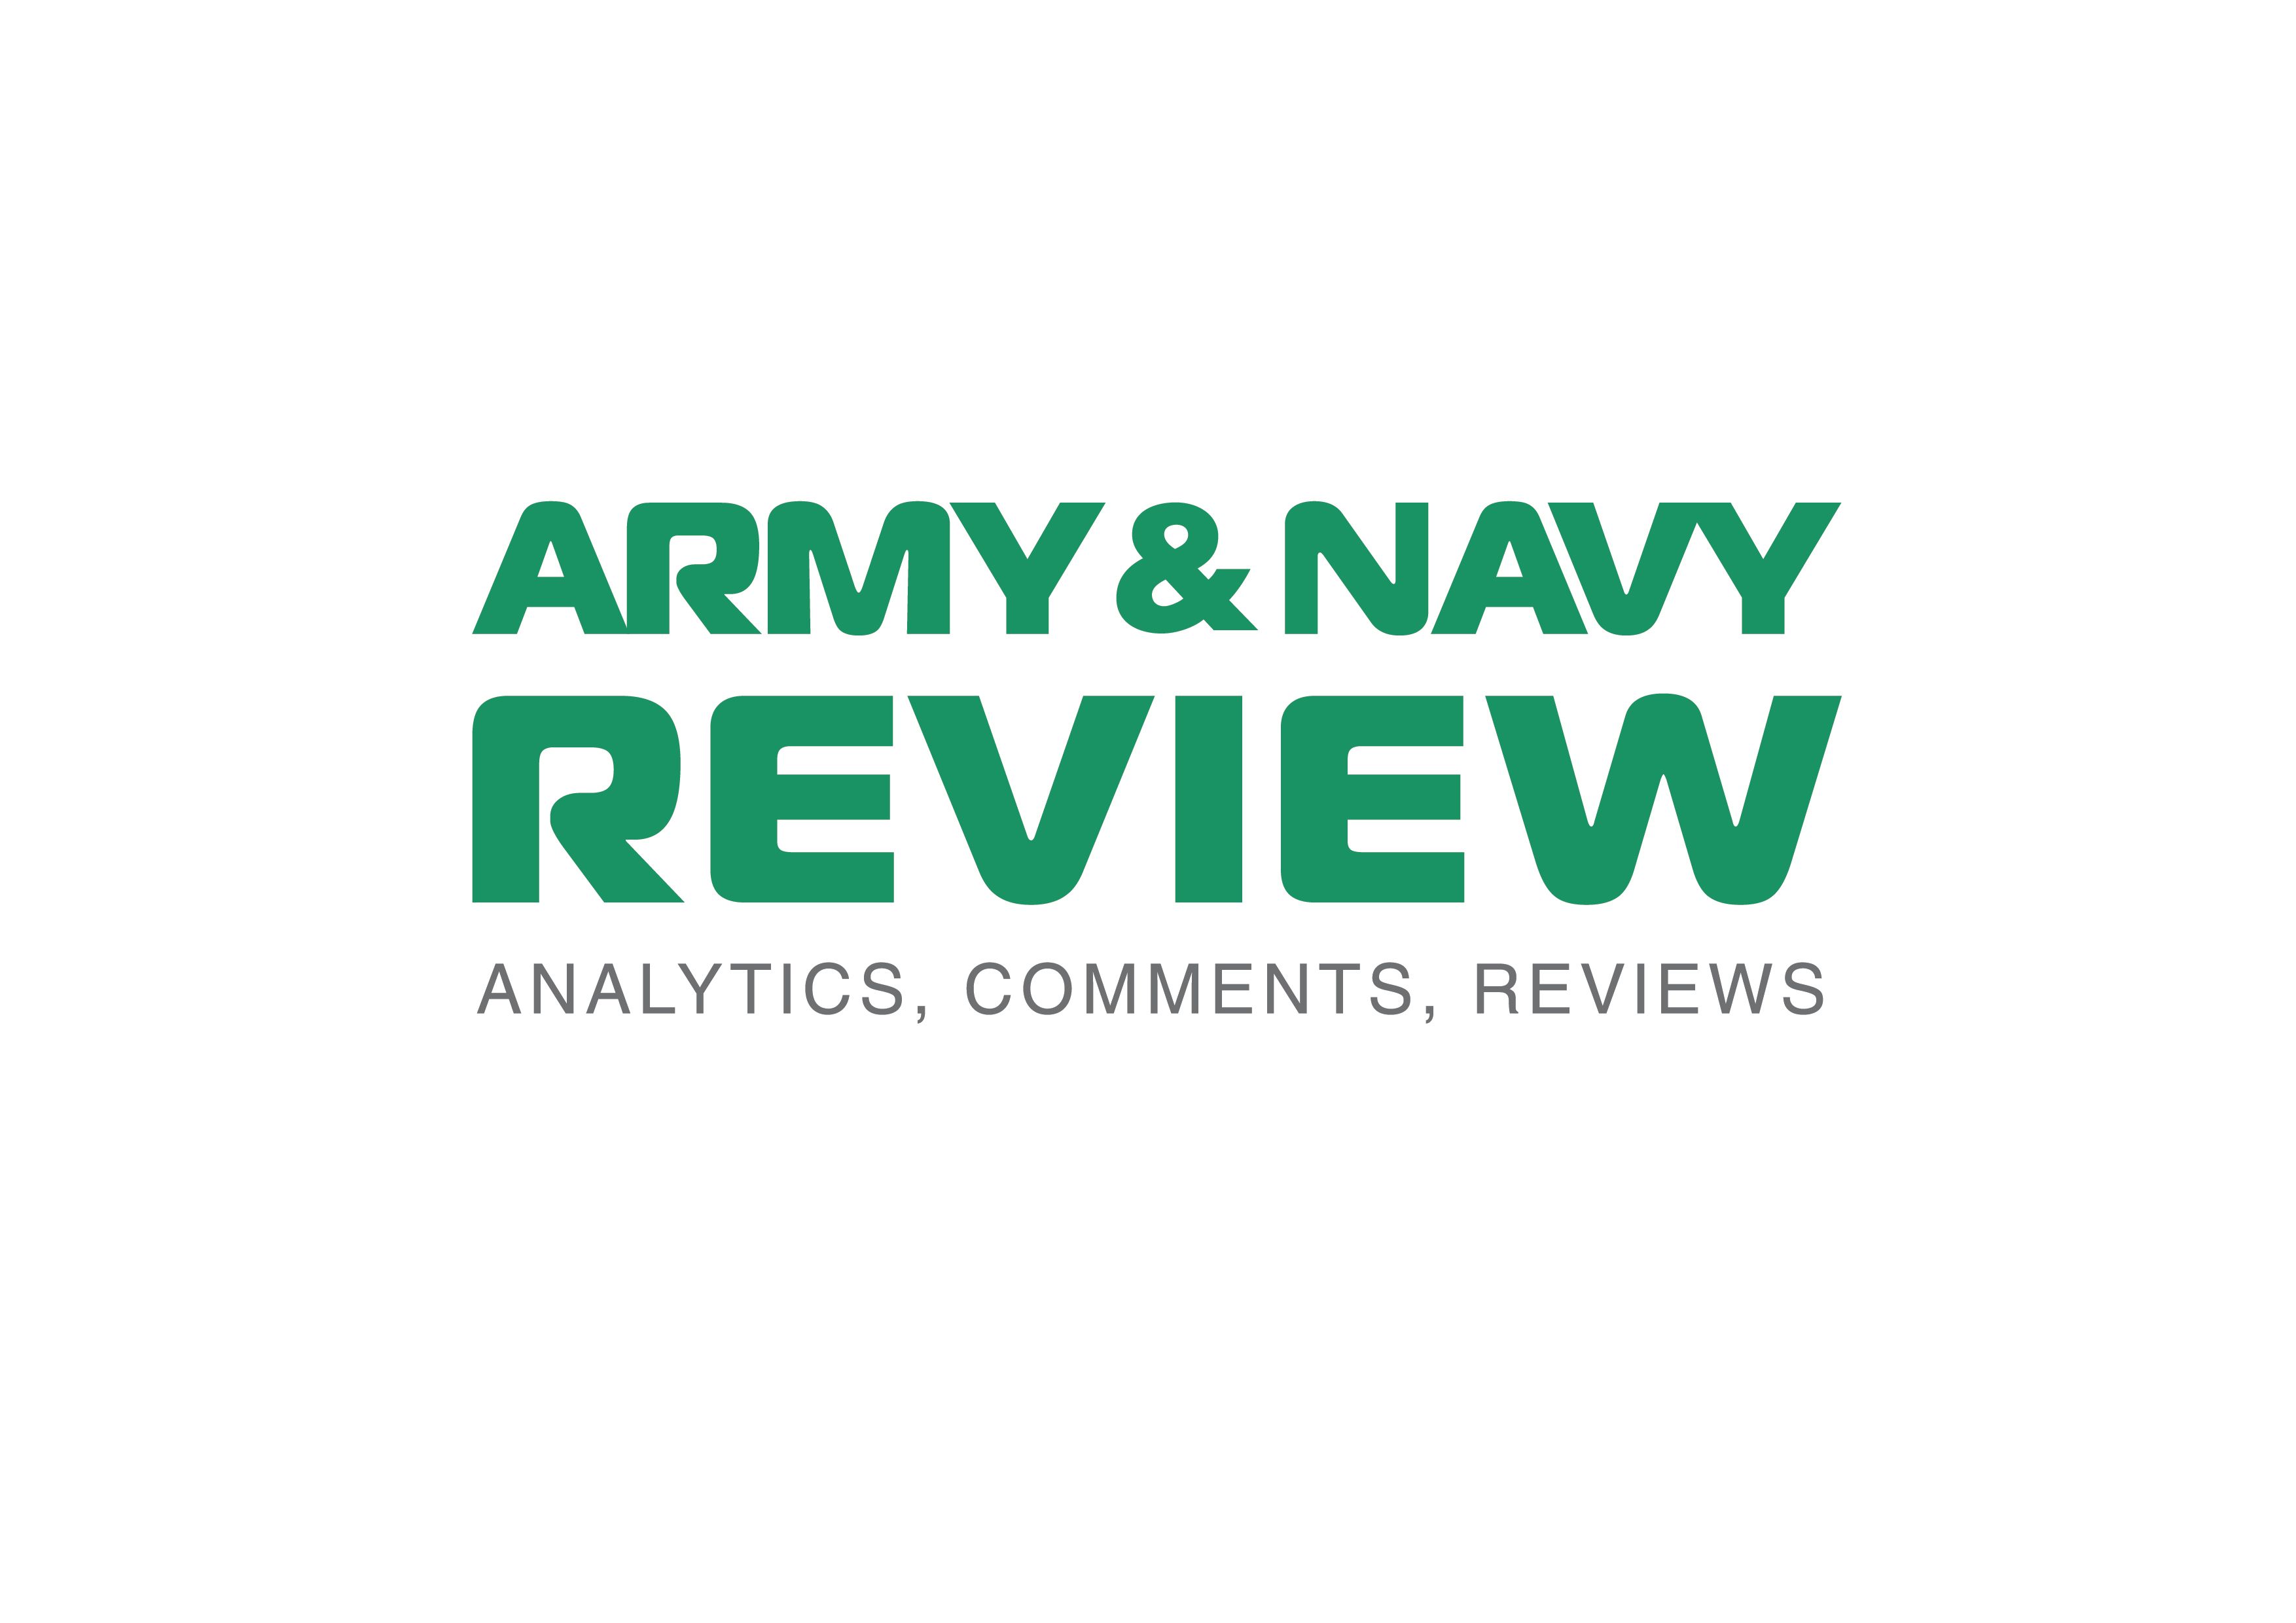 ARMY & NAVY REVIEW